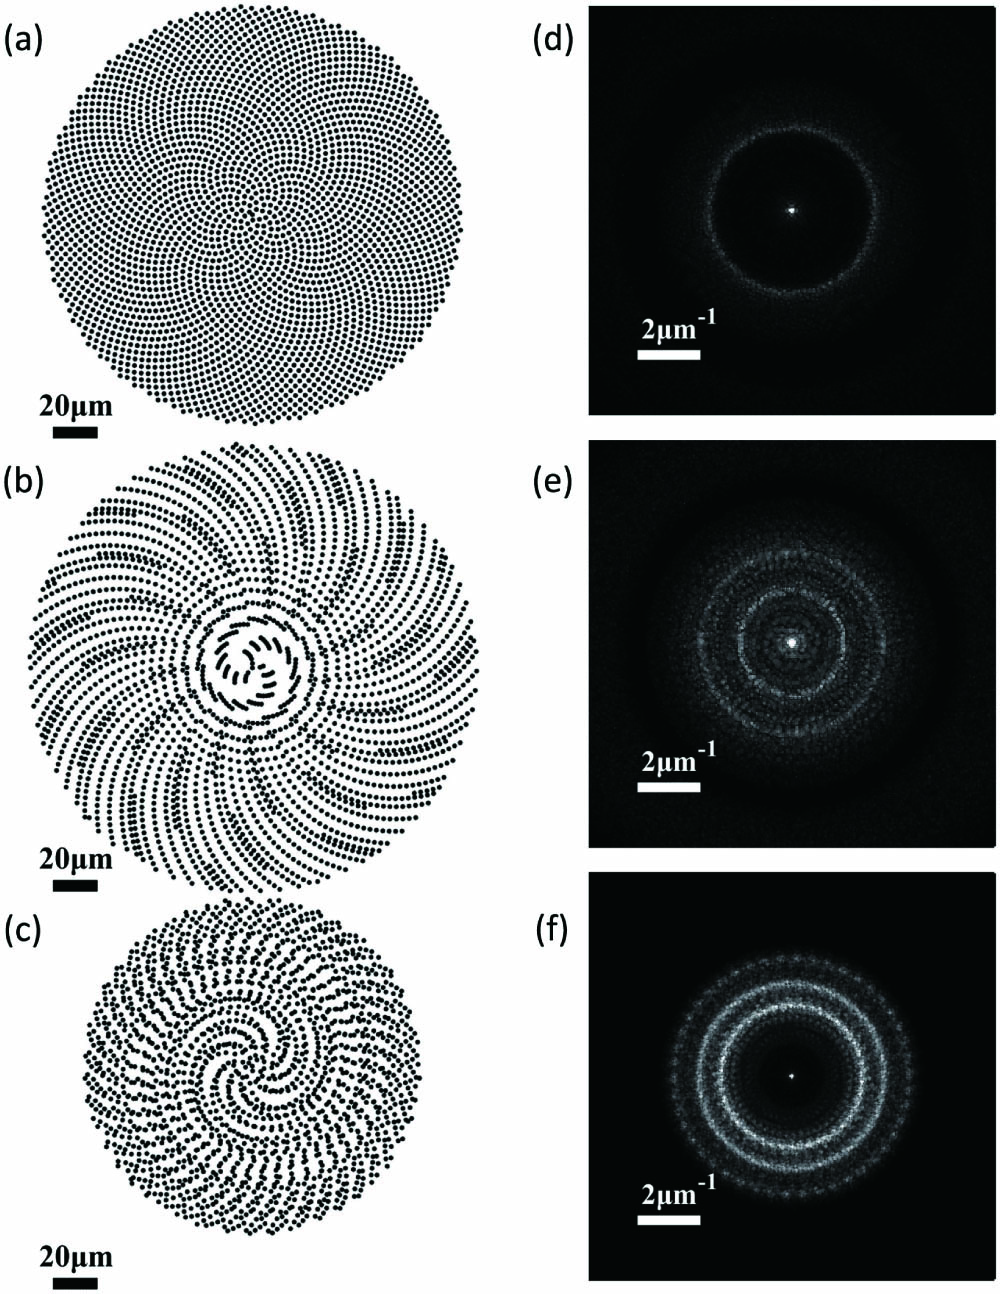 (a) Golden-angle spiral with b = 1.70 µm and a total of 3000 points; (b) nonlinear photonic quasi-periodic spiral structure based on rearrangement of α, with the two construction parameters α1 being the golden angle and α2 = 1.57, b = 1.70 µm; (c) nonlinear photonic quasi-periodic spiral structure based on rearrangement of b, with the two construction parameters b1 = 1.50 µm and b2 = 2.00 µm; (d)–(f) Fourier spatial spectra of (a)–(c).